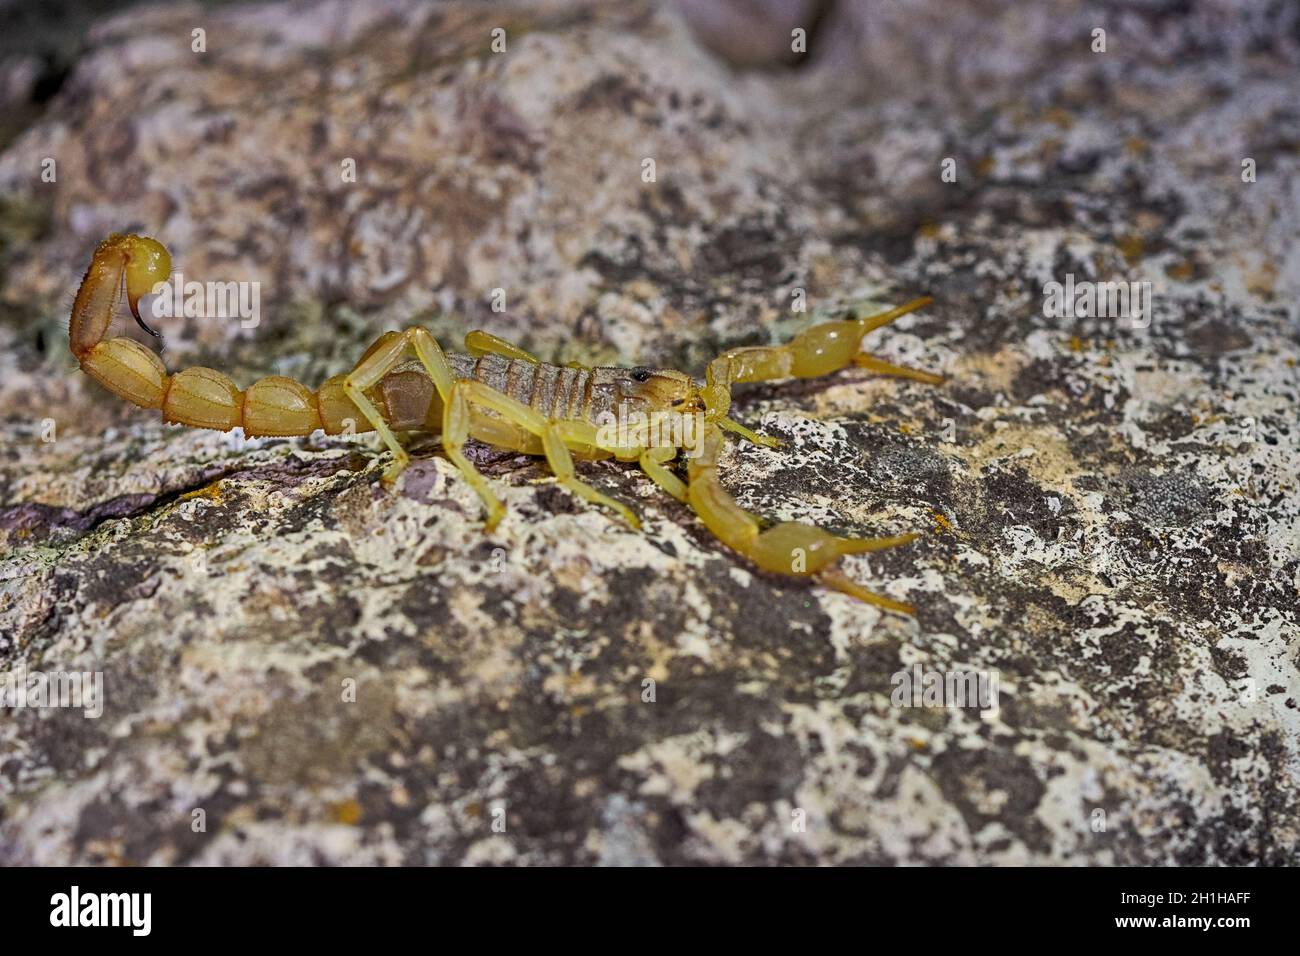 Buthus montanus. Scorpion isolated on a natural background Stock Photo